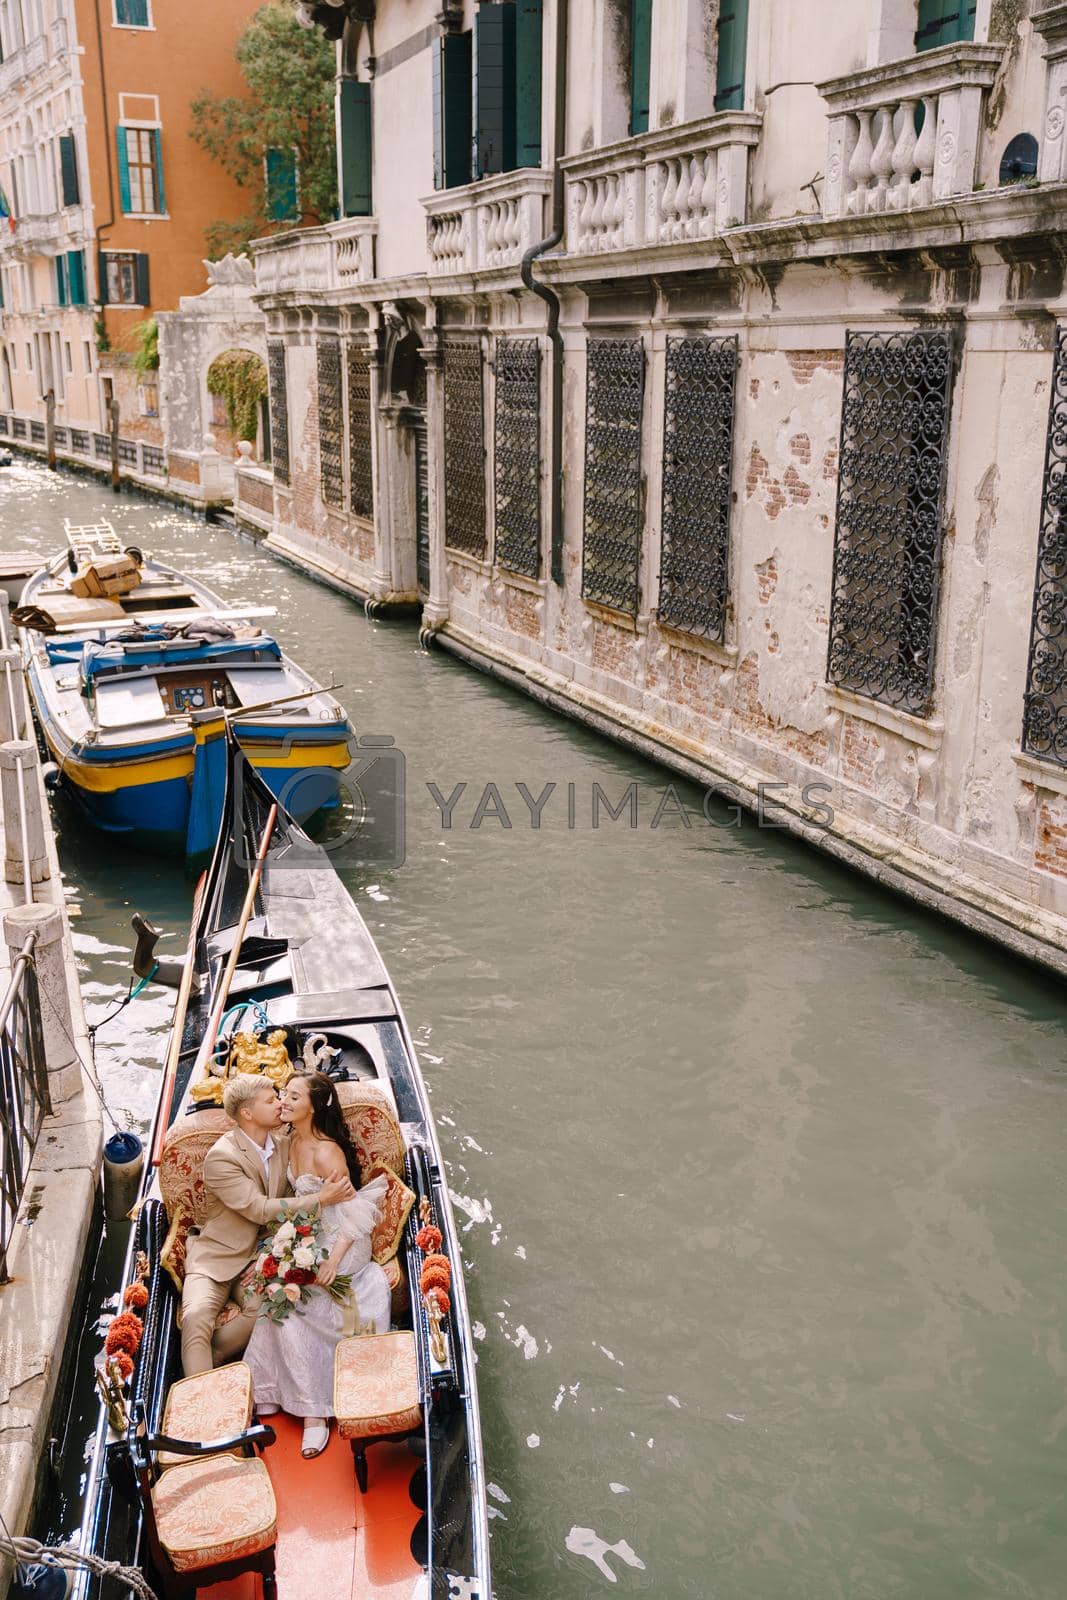 Royalty free image of Italy wedding in Venice. A gondolier rolls a bride and groom in a classic wooden gondola along a narrow Venetian canal. Newlyweds kiss in a boat moored to the shore. by Nadtochiy